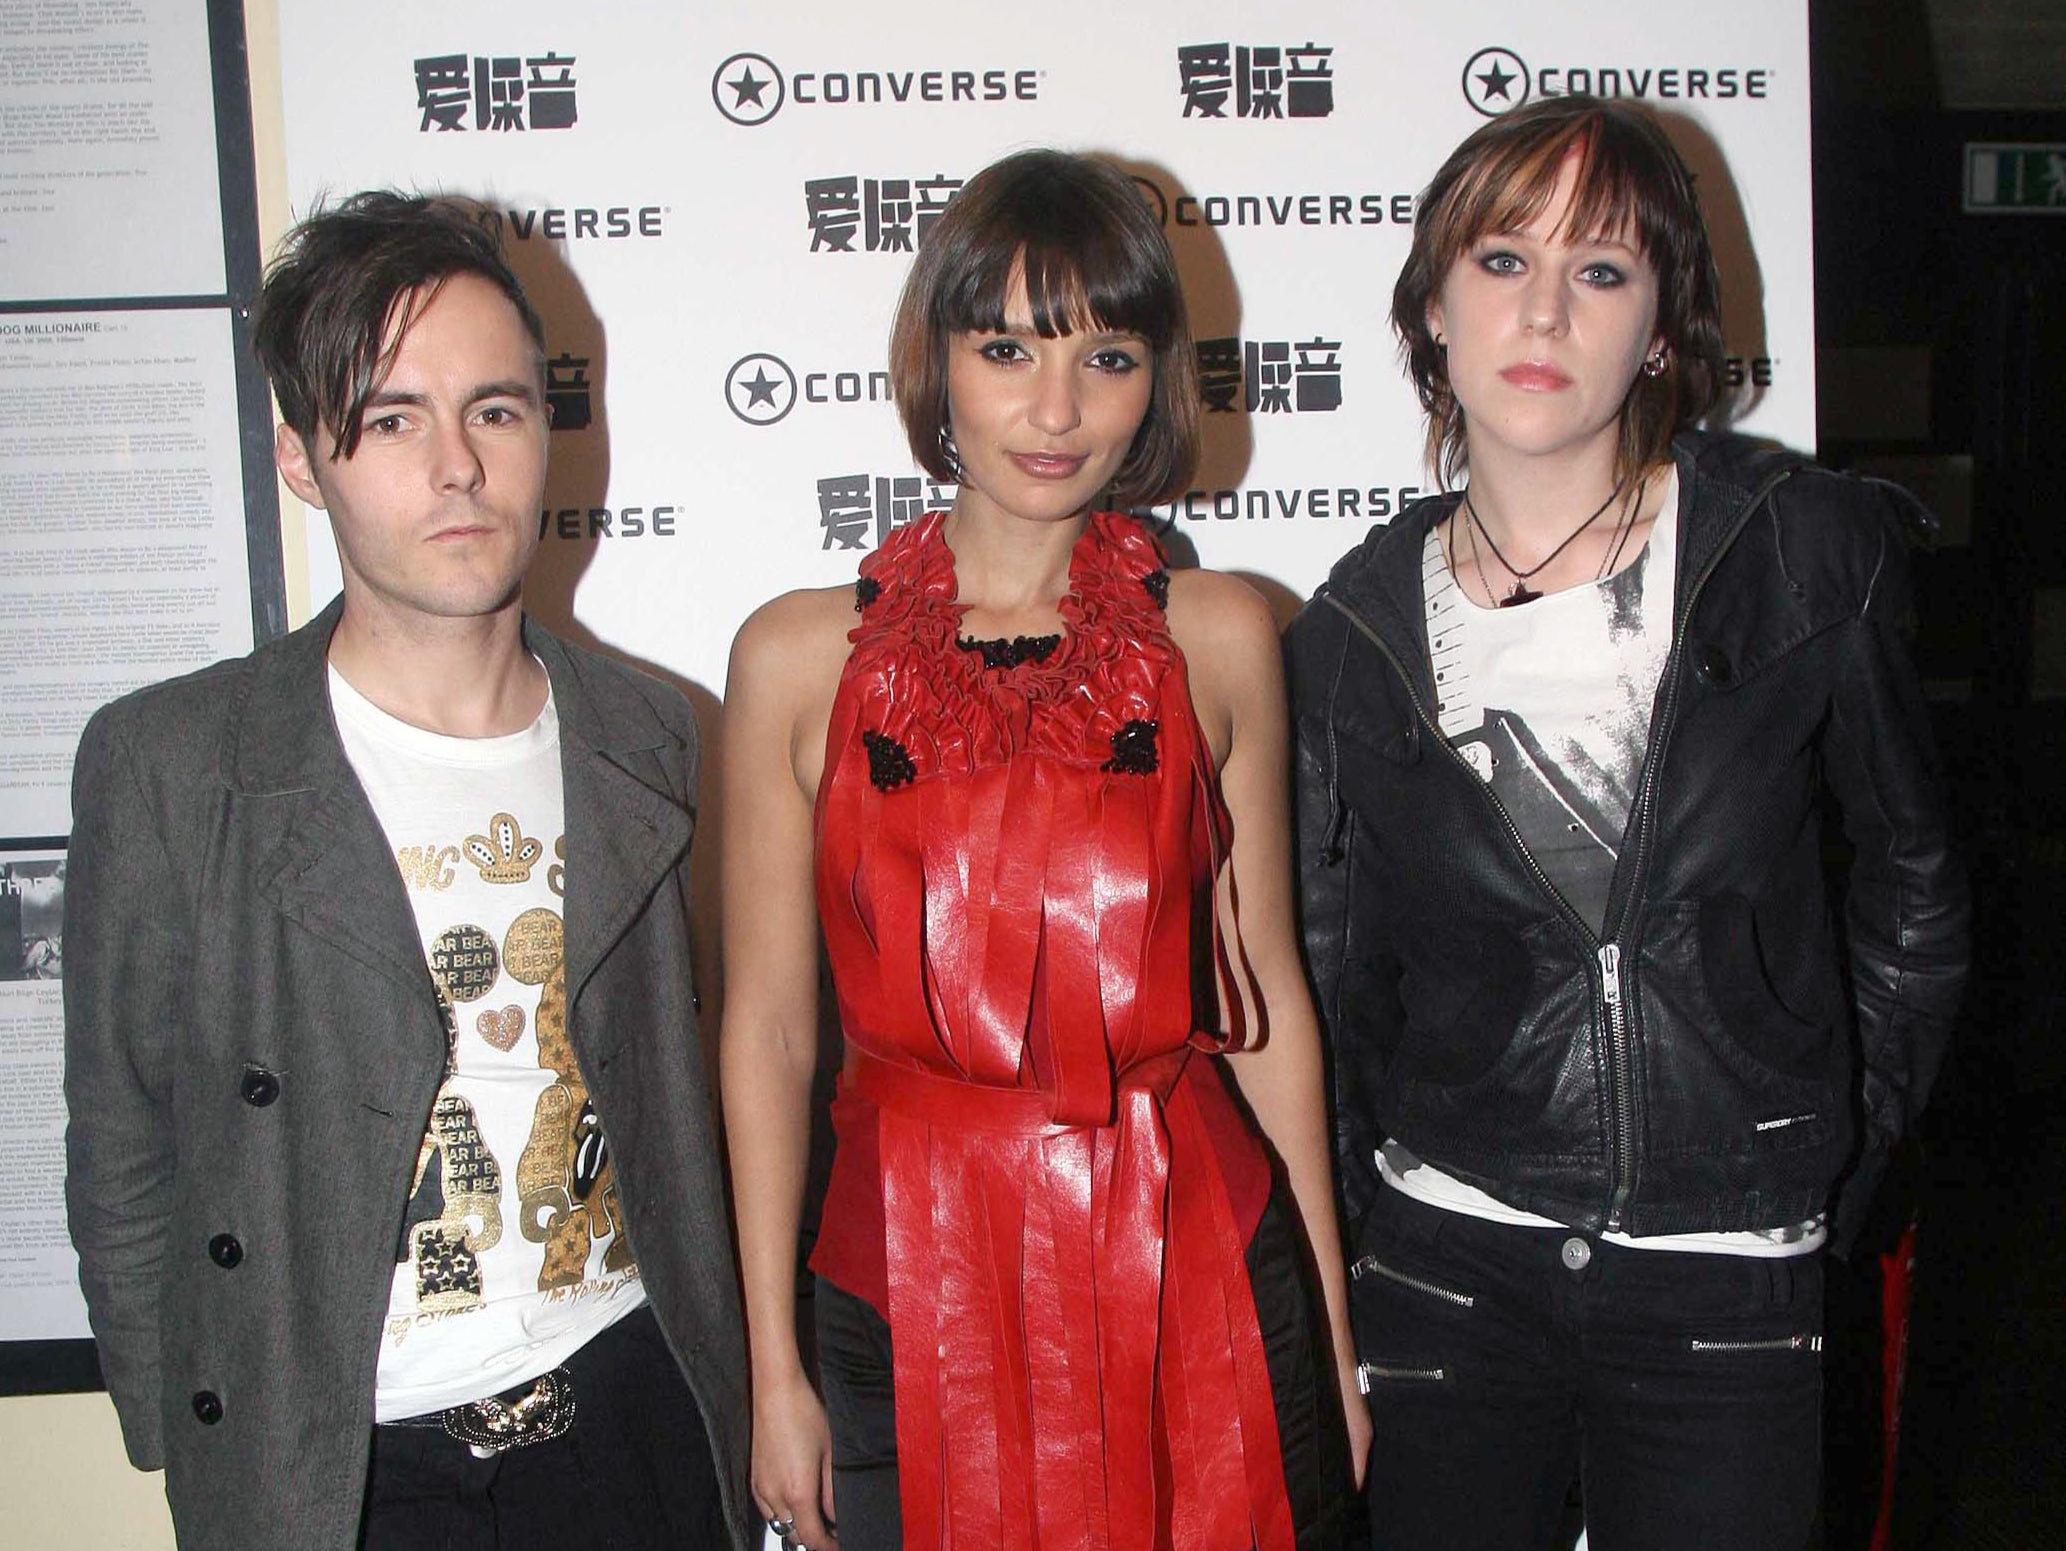 Mckenzie (right) pictured with her band Goldbug